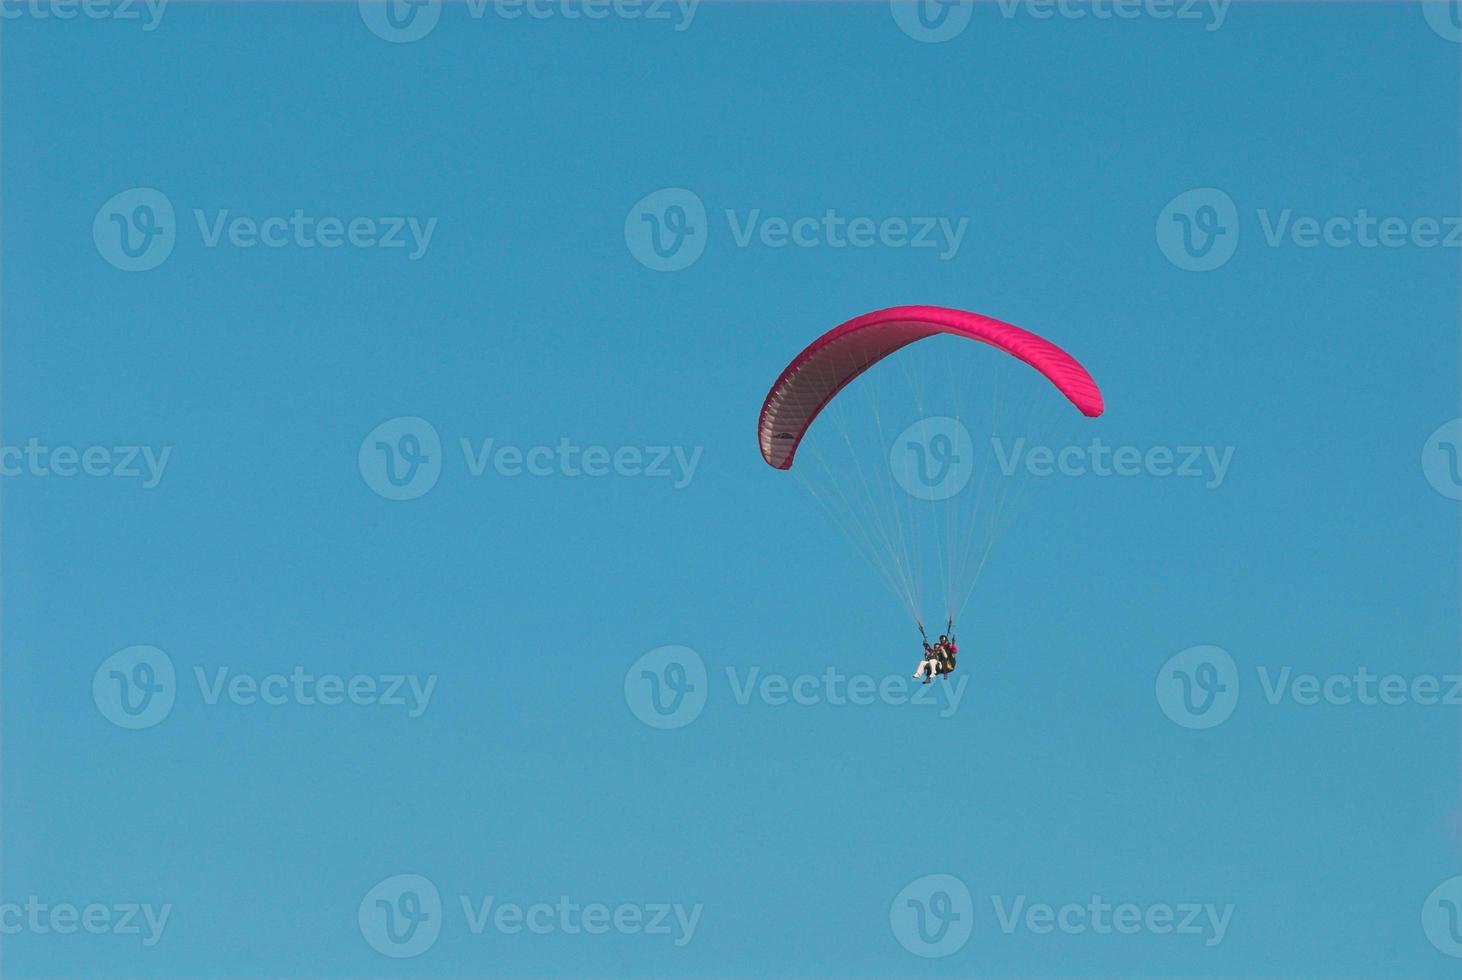 paragliders in the blue cloudless sky photo